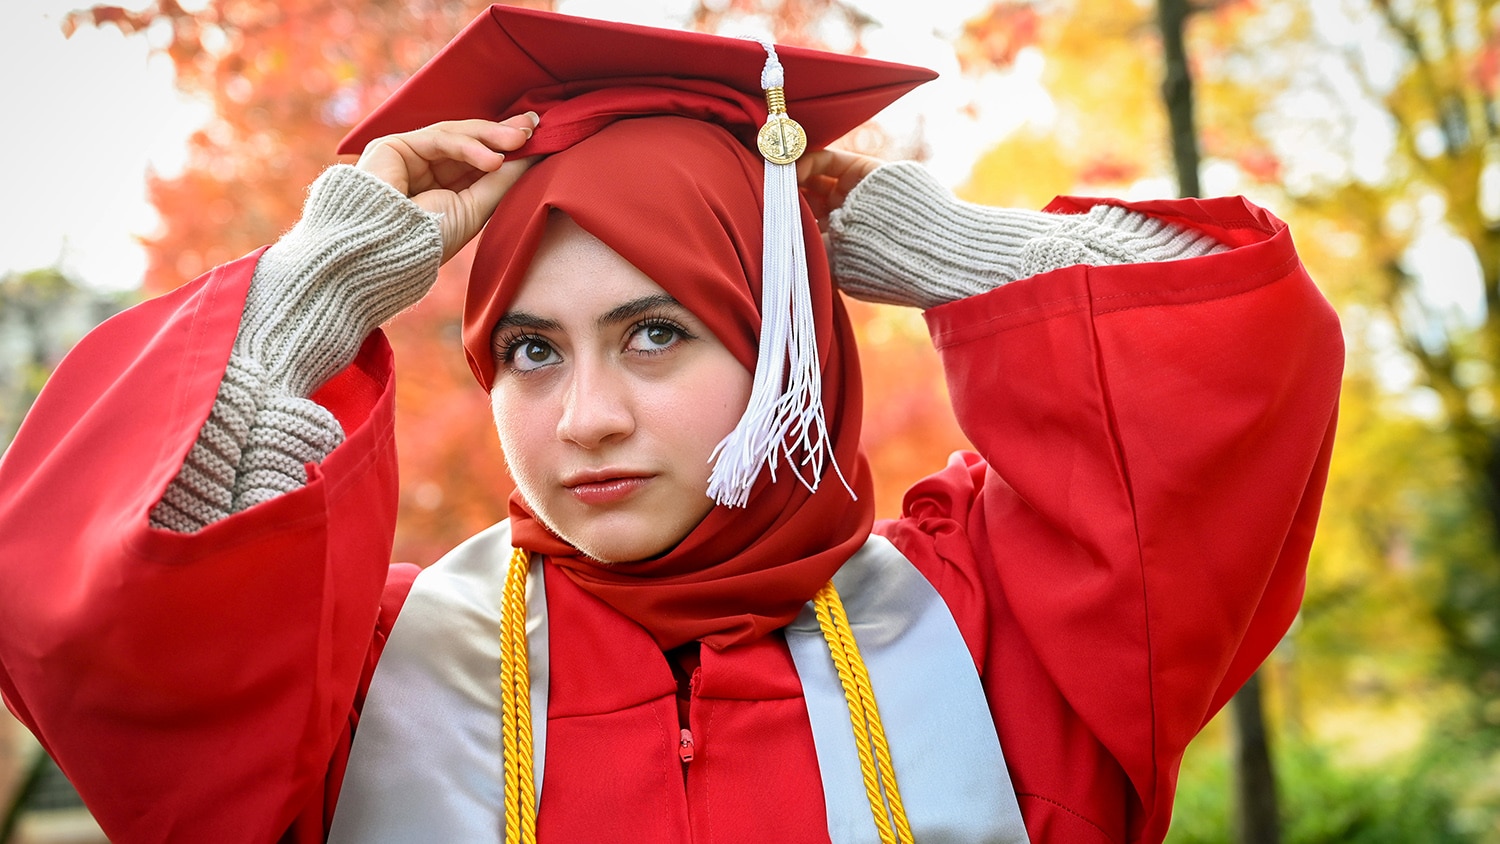 Portrait of Maab Aldulimy wearing her red graduation gown and adjusting her cap and tassel.